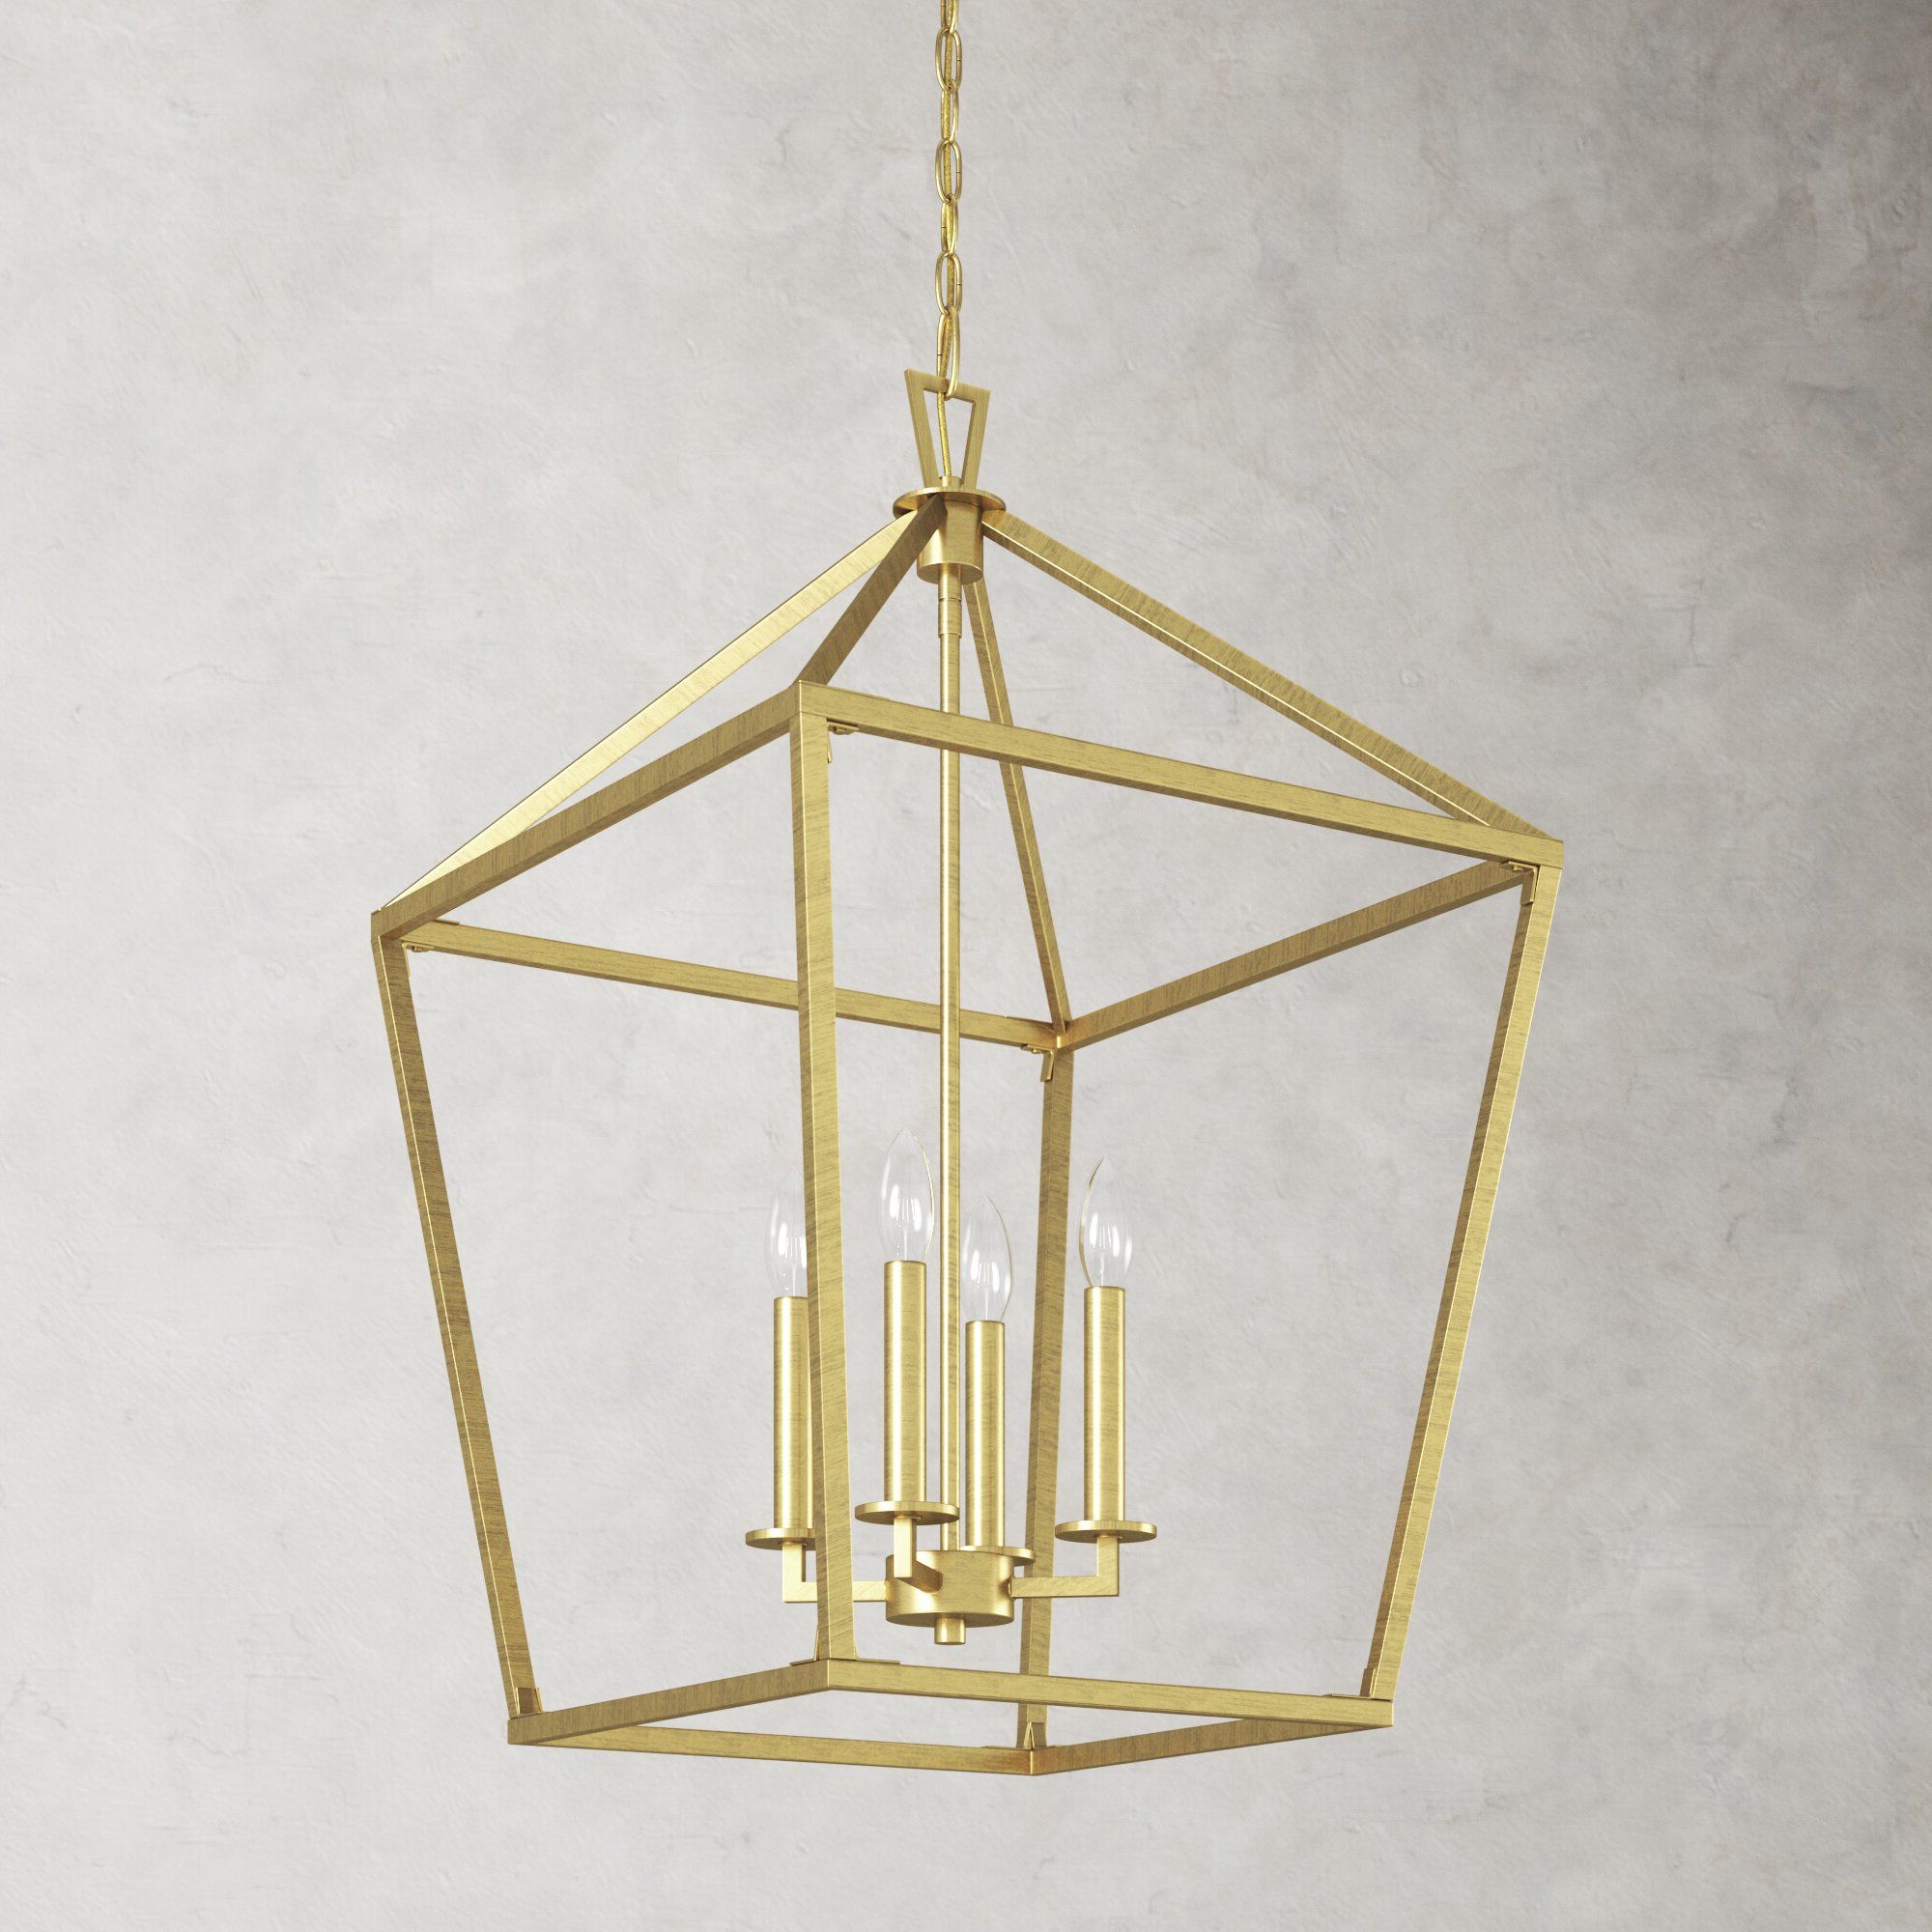 Brass Finish Lantern Chandeliers You'll Love In 2022 With Regard To Most Recently Released Brass Wrapped Lantern Chandeliers (View 1 of 10)